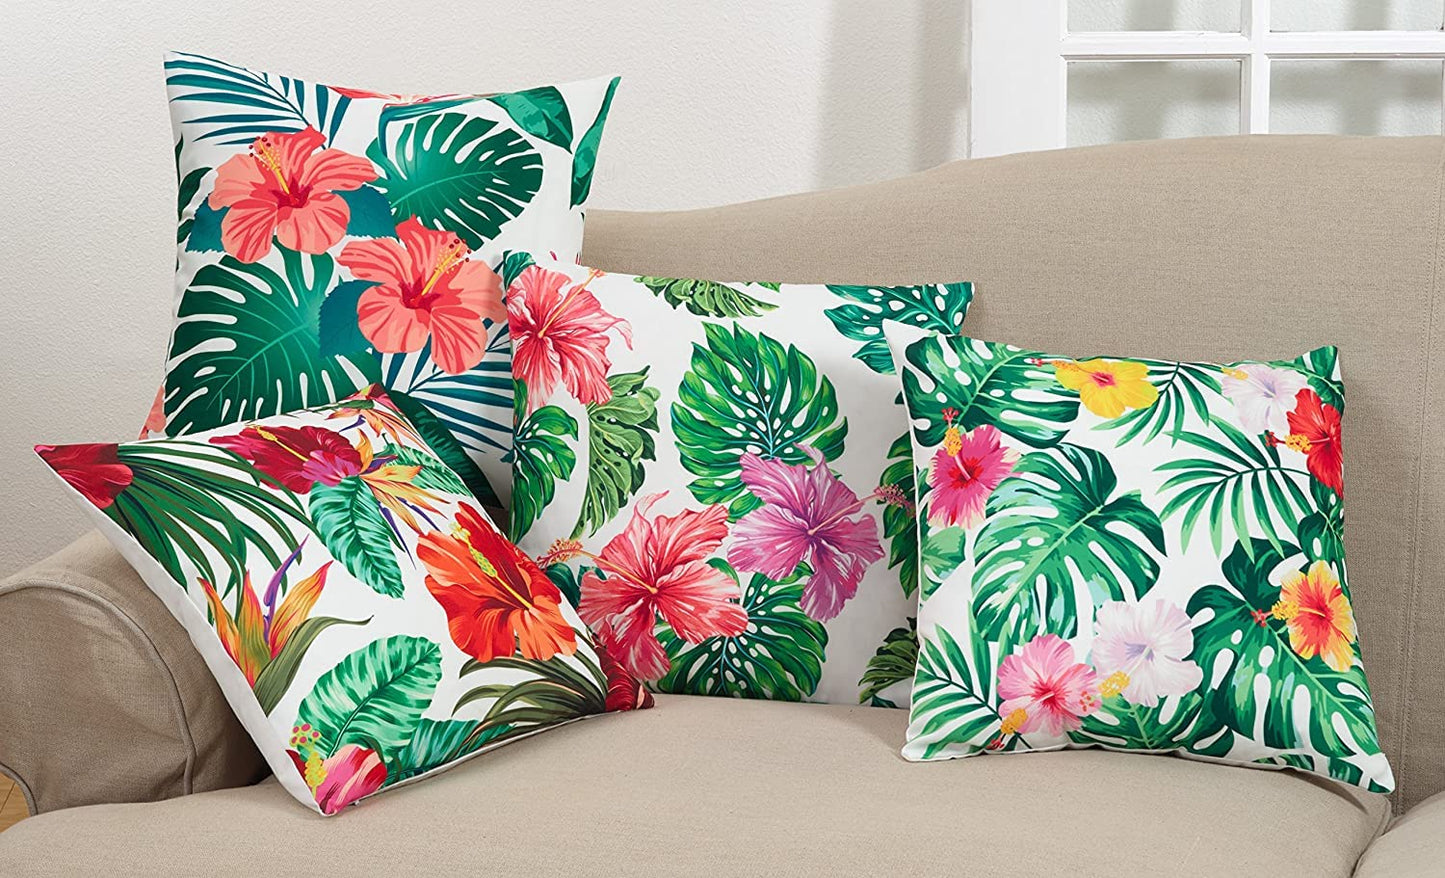 Fennco Styles Monstera Hibiscus Poly Filled Decorative Throw Pillow18 W x 18" L - Multicolored Tropical Cushion for Home, Indoor Outdoor, Living Room, Couch, Bedroom and Office Décor